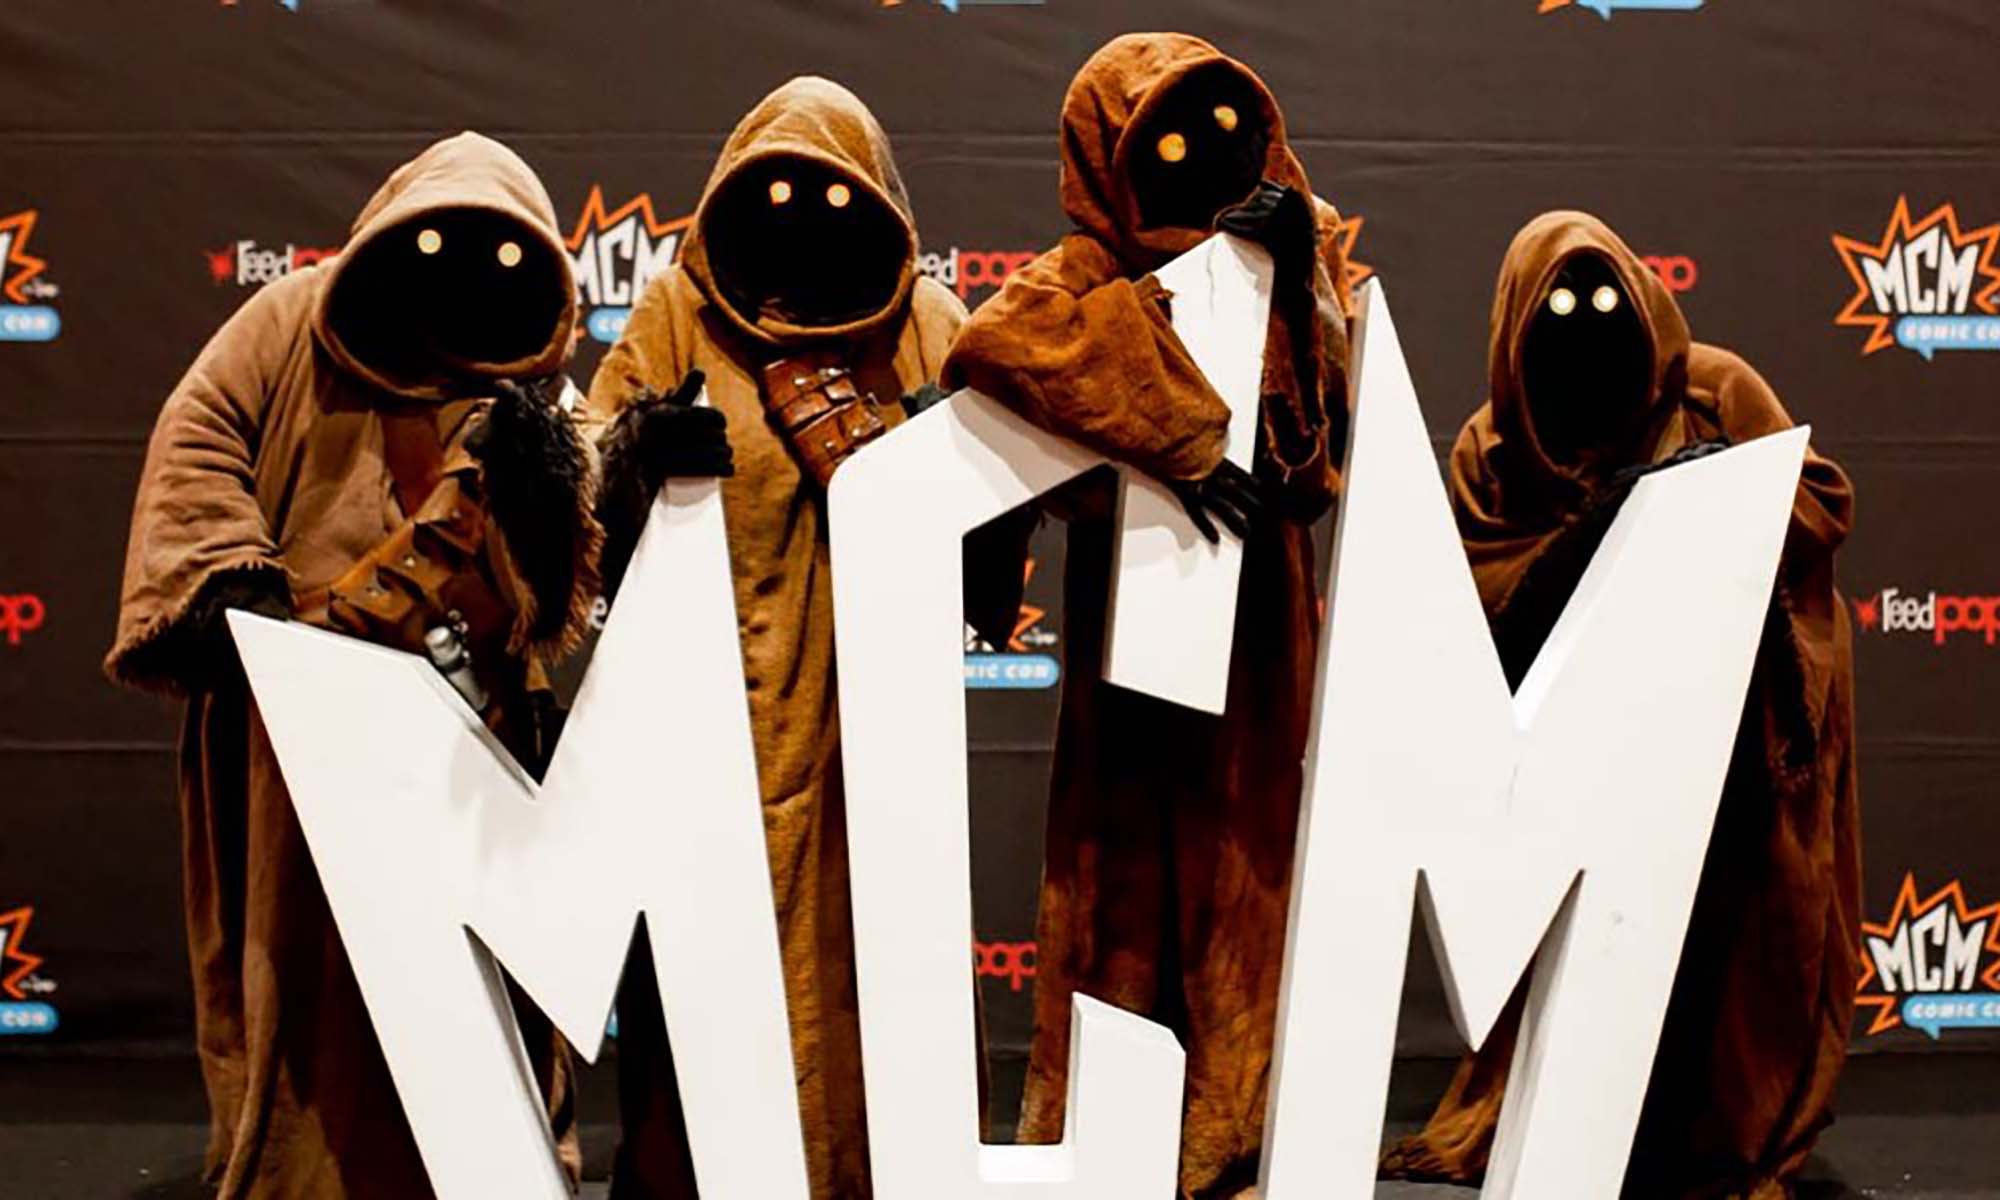 London Mcm Comic Con's Summer 2023 Dates Confirmed - And It's A Bank Holiday  Weekend! | Popverse